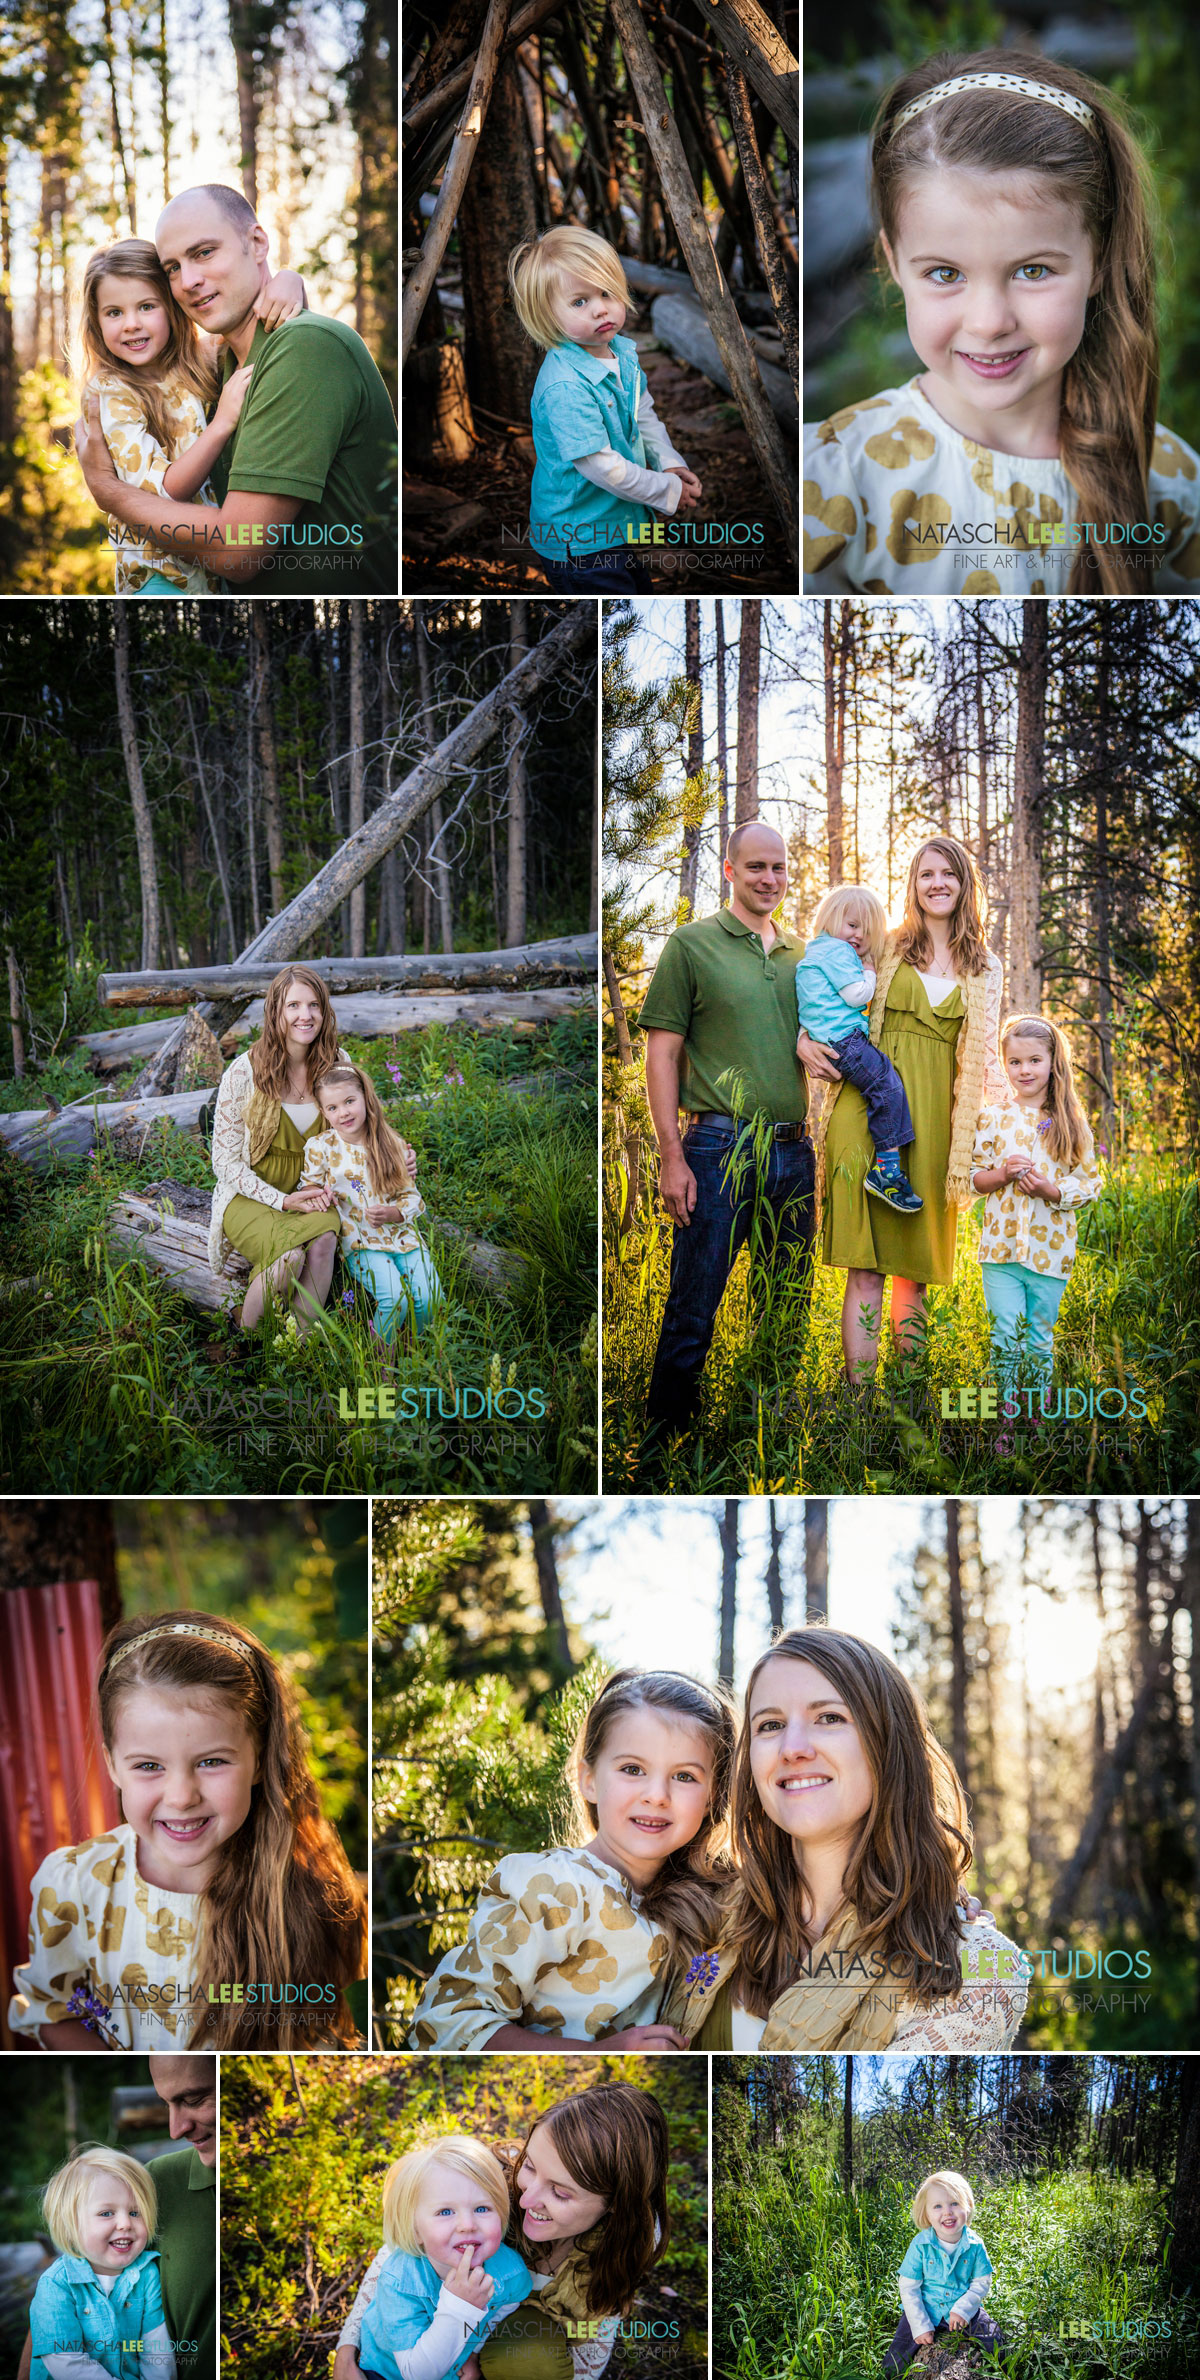 Fraser Family Portraits Outdoors by Natascha Lee Studios